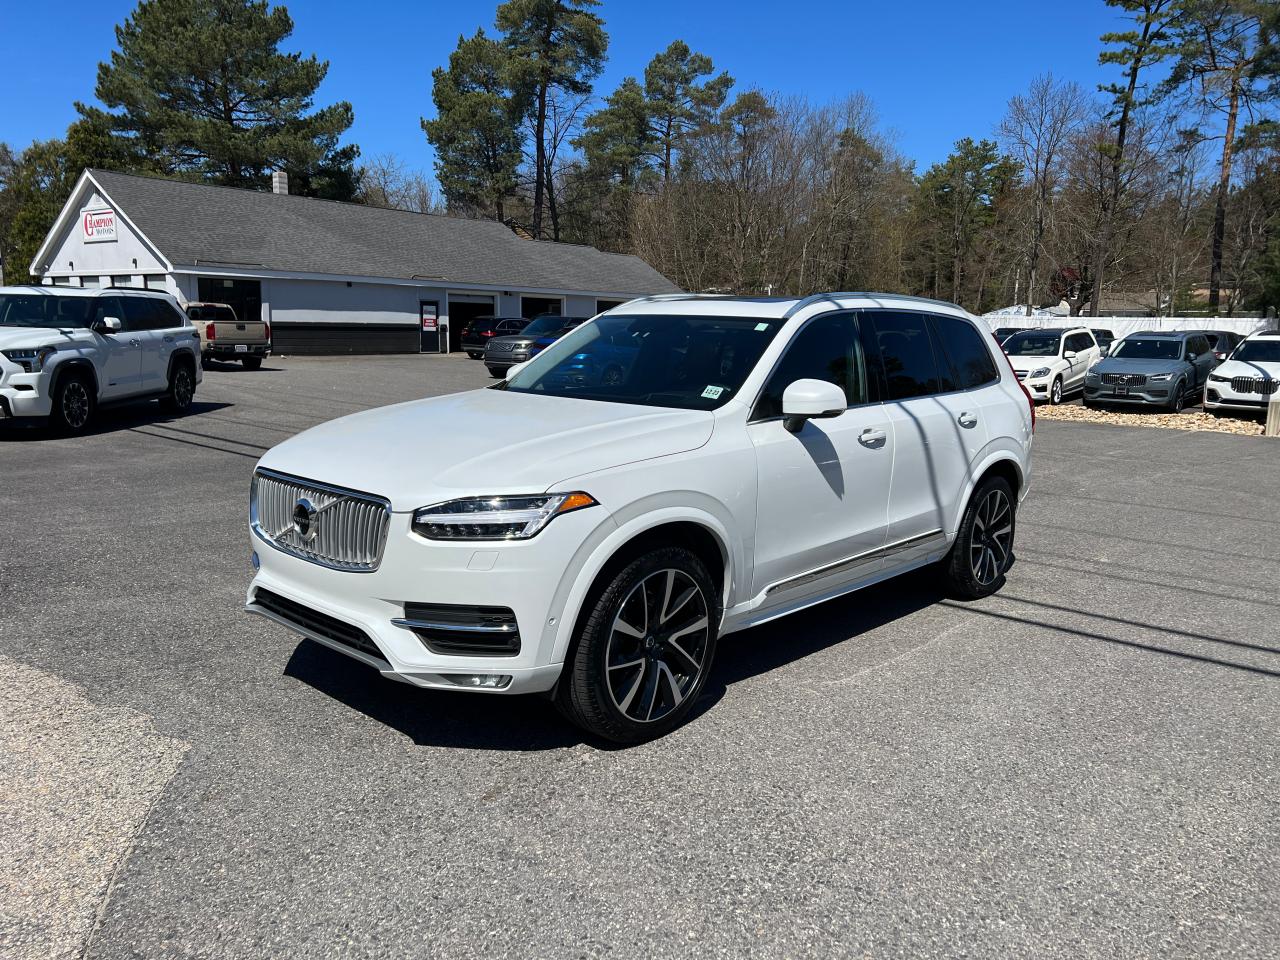 Buy 2019 Volvo Xc90 T6 In 2.0L YV4A22PL9K1****** from USA Auctions 